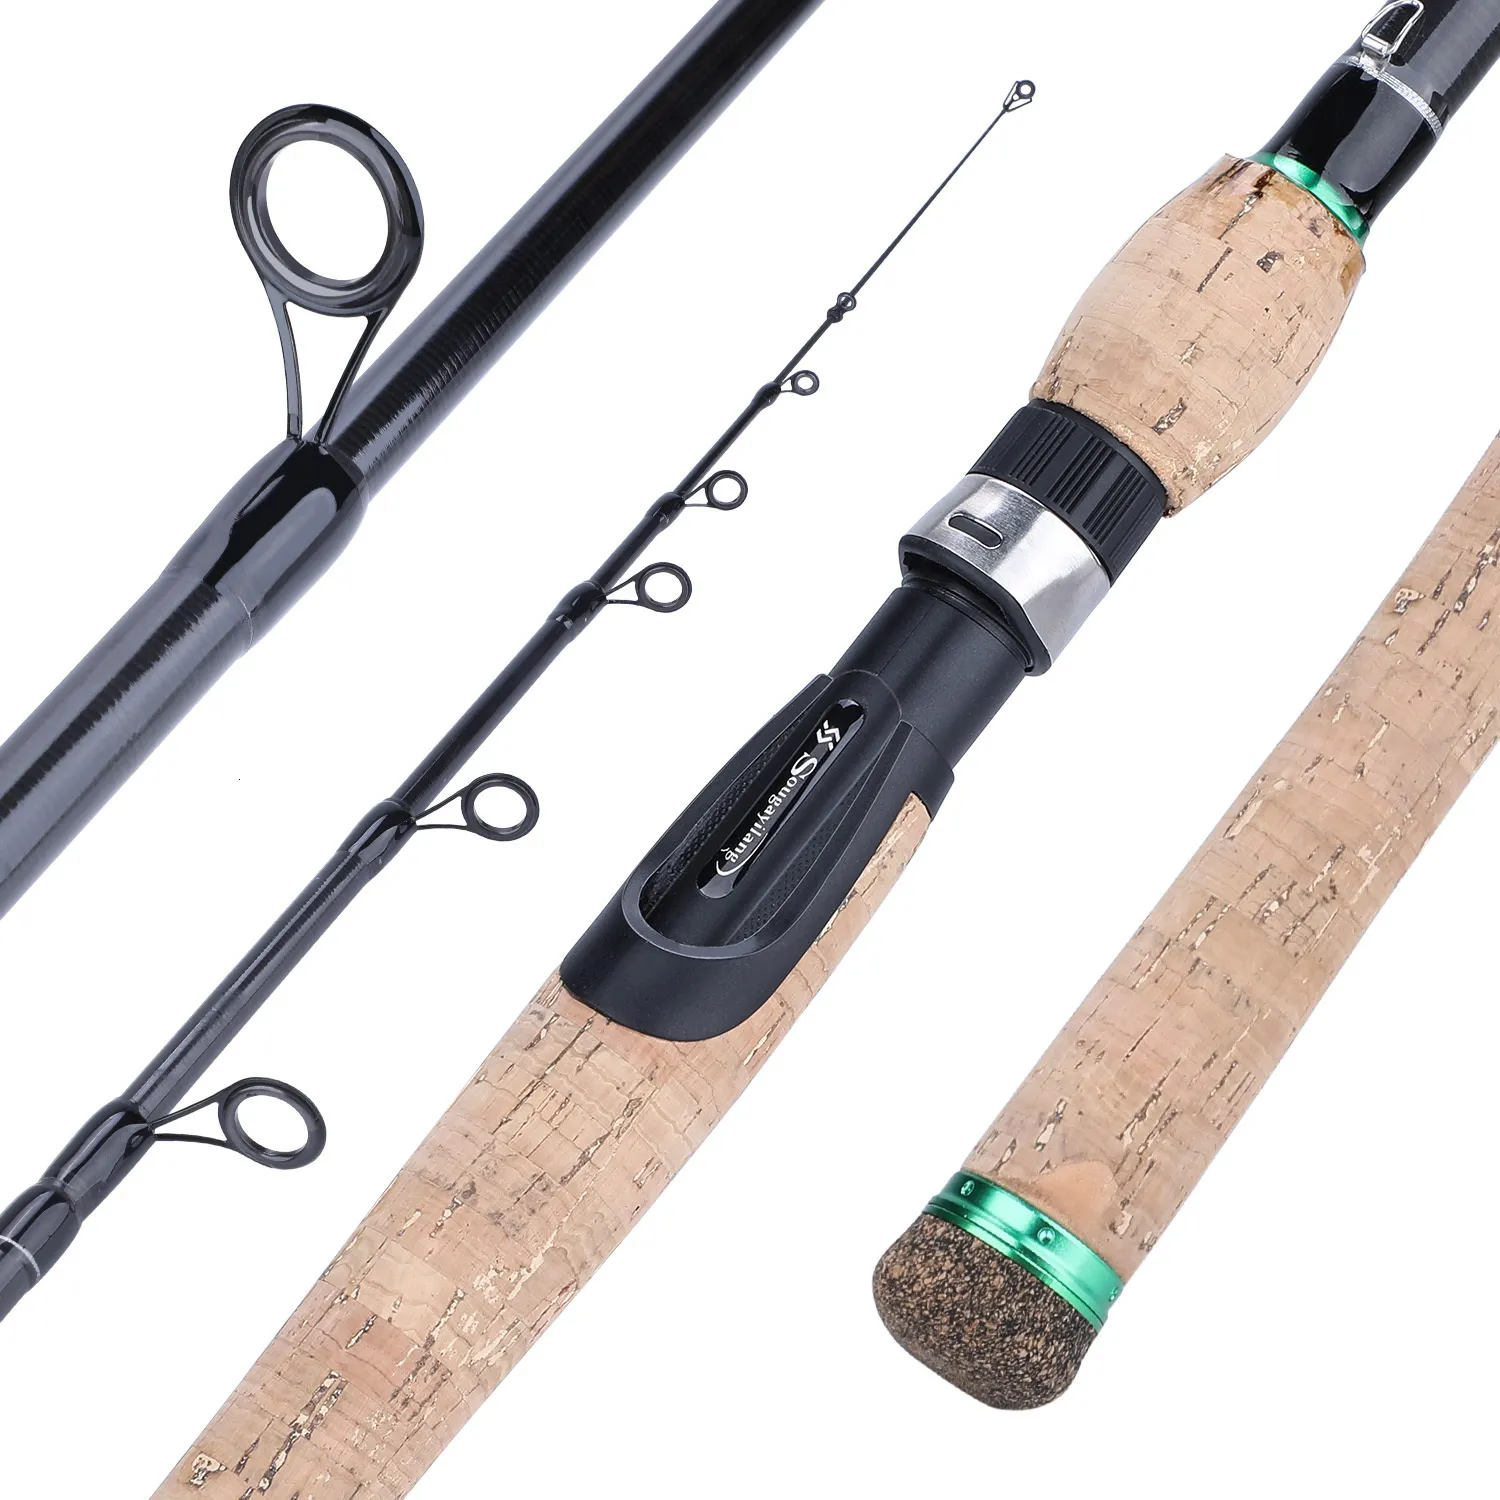 Sougayilang Portable Telescopic Unbreakable Fishing Rod Carbon Fiber Cork  Wood Handle, Spinning/Casting, Boat Fishing Tackle Available In 1.8M, 2.1M;  2.,4M And 2M Lengths Model: 230324 From Yao09, $14.91